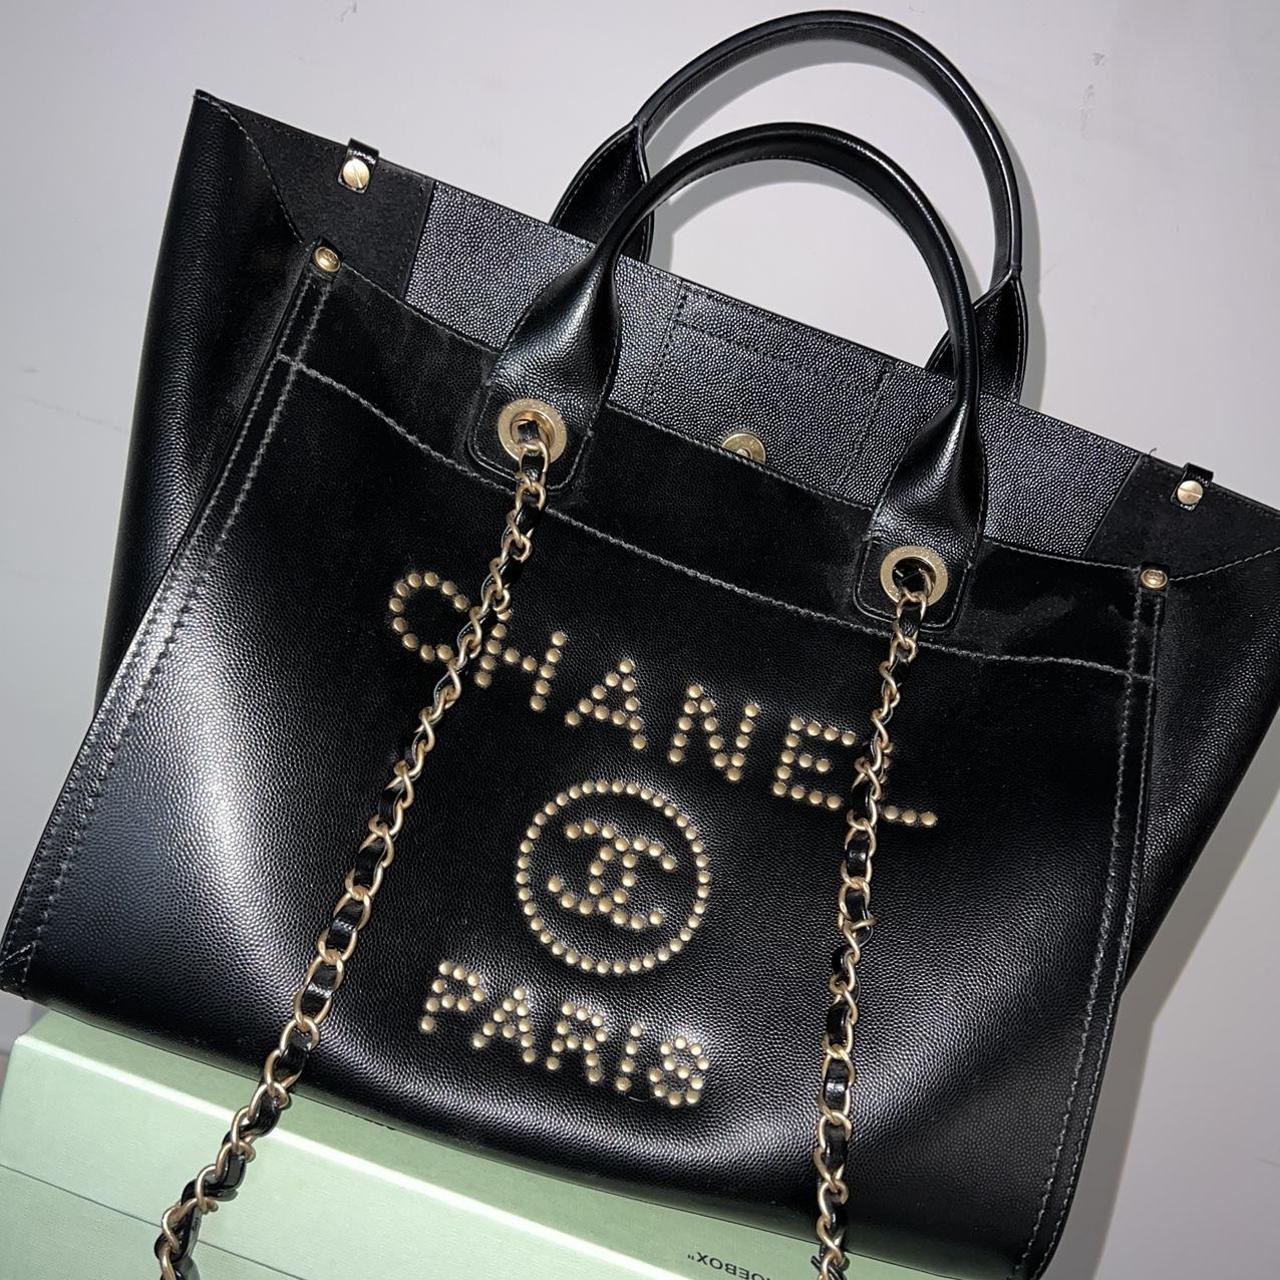 CHANEL SS 18/19 BLACK CAVIAR LEATHER DEAUVILLE TOTE - Depop